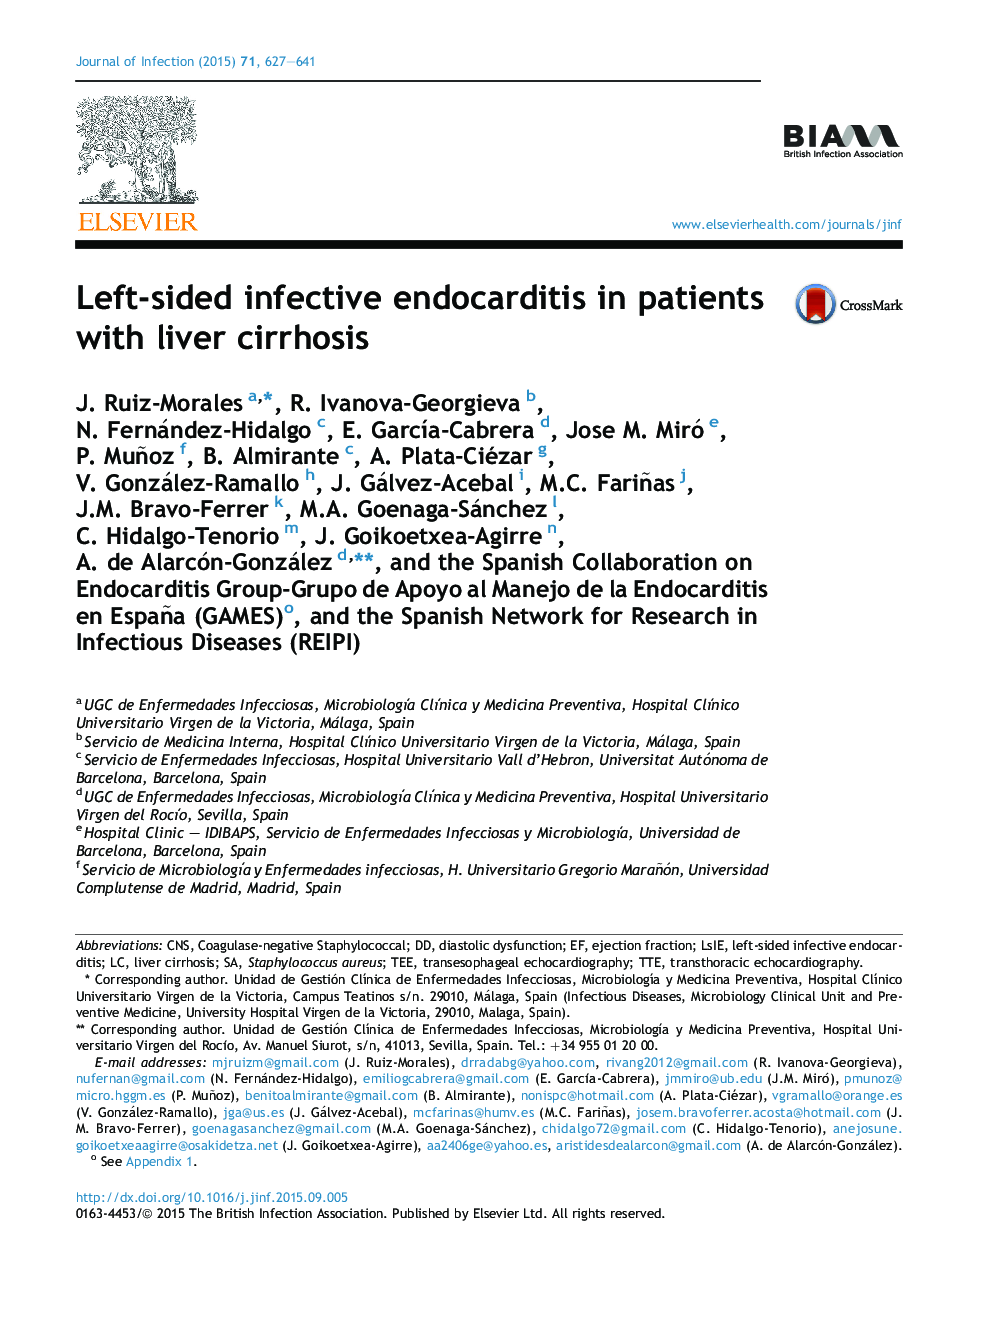 Left-sided infective endocarditis in patients with liver cirrhosis